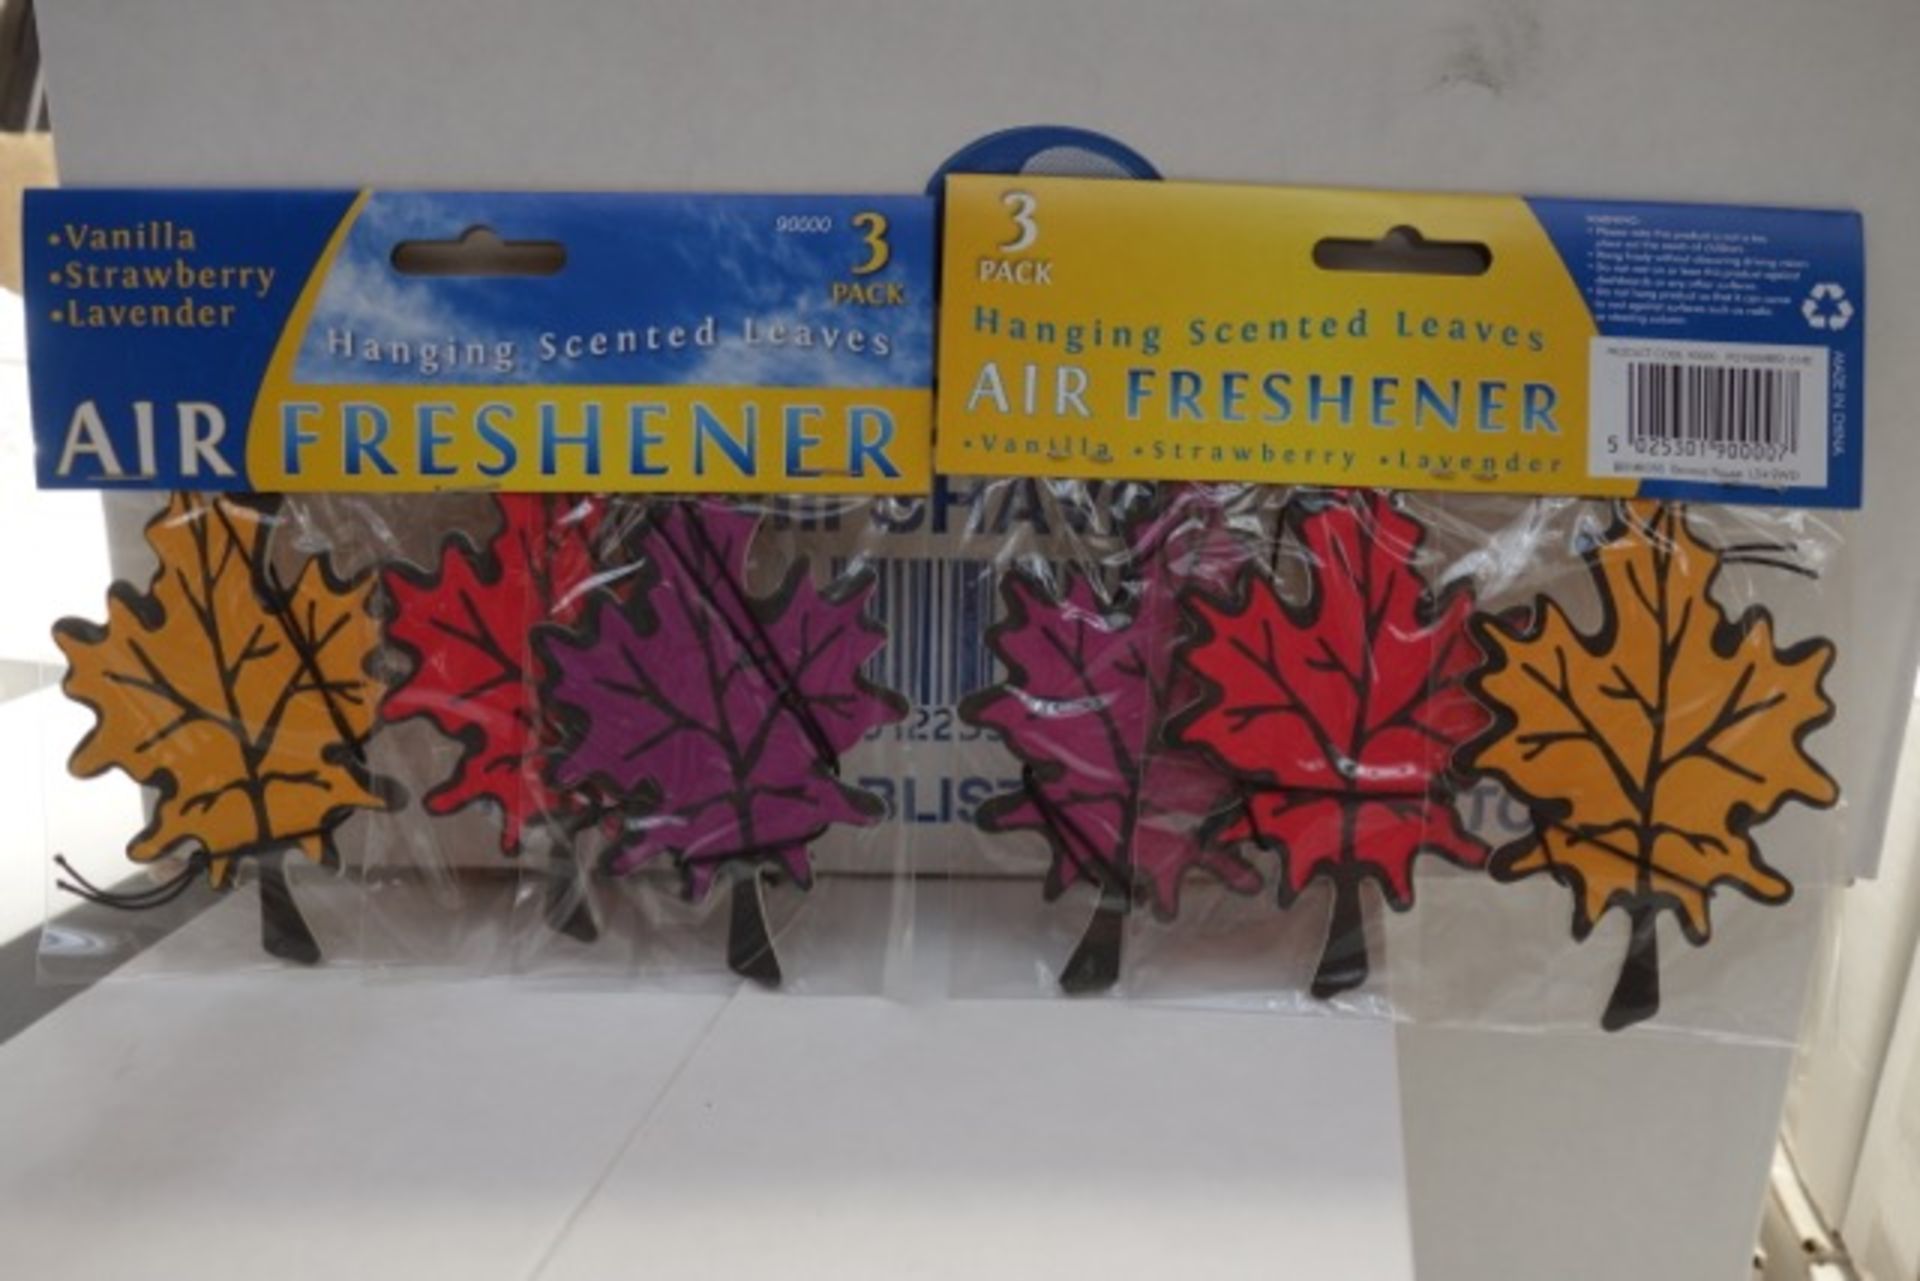 160 x 3 Pack Hanging Air Freshners. Vanilla, Strawberry & Lavender. RRP £2.99 per pack, giving